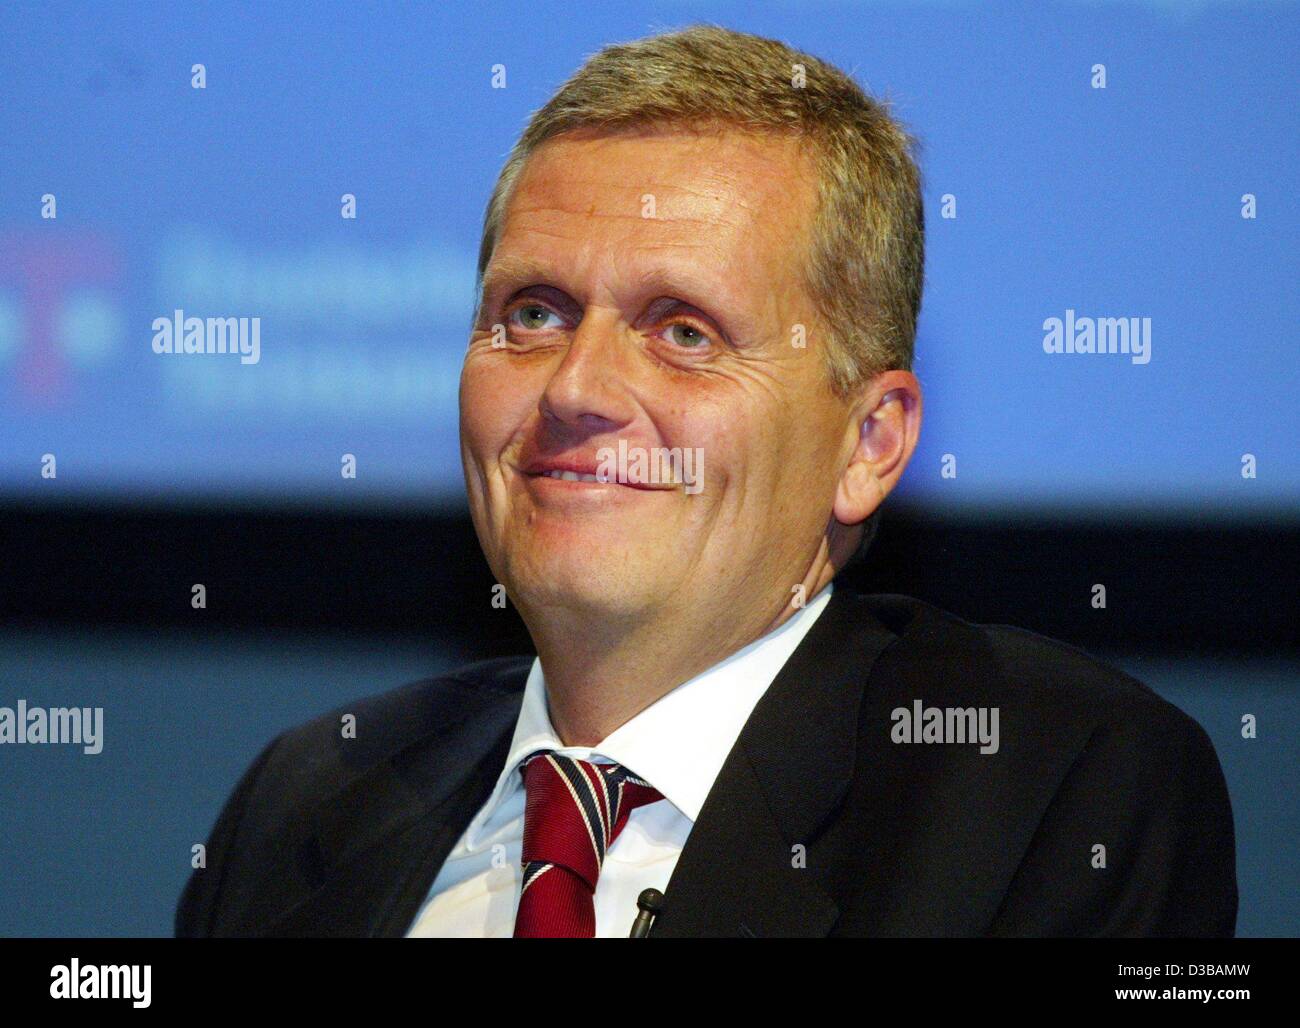 (dpa) - Kai-Uwe Ricke, new chairman of German Telekom, smiles during a press conference in Bonn, Germany, 14 November 2002. Ricke was appointed new chairman on 14 November and took over his new post on 15 November. German telecoms operator Deutsche Telekom announced a record net loss of 24.5 billion Stock Photo